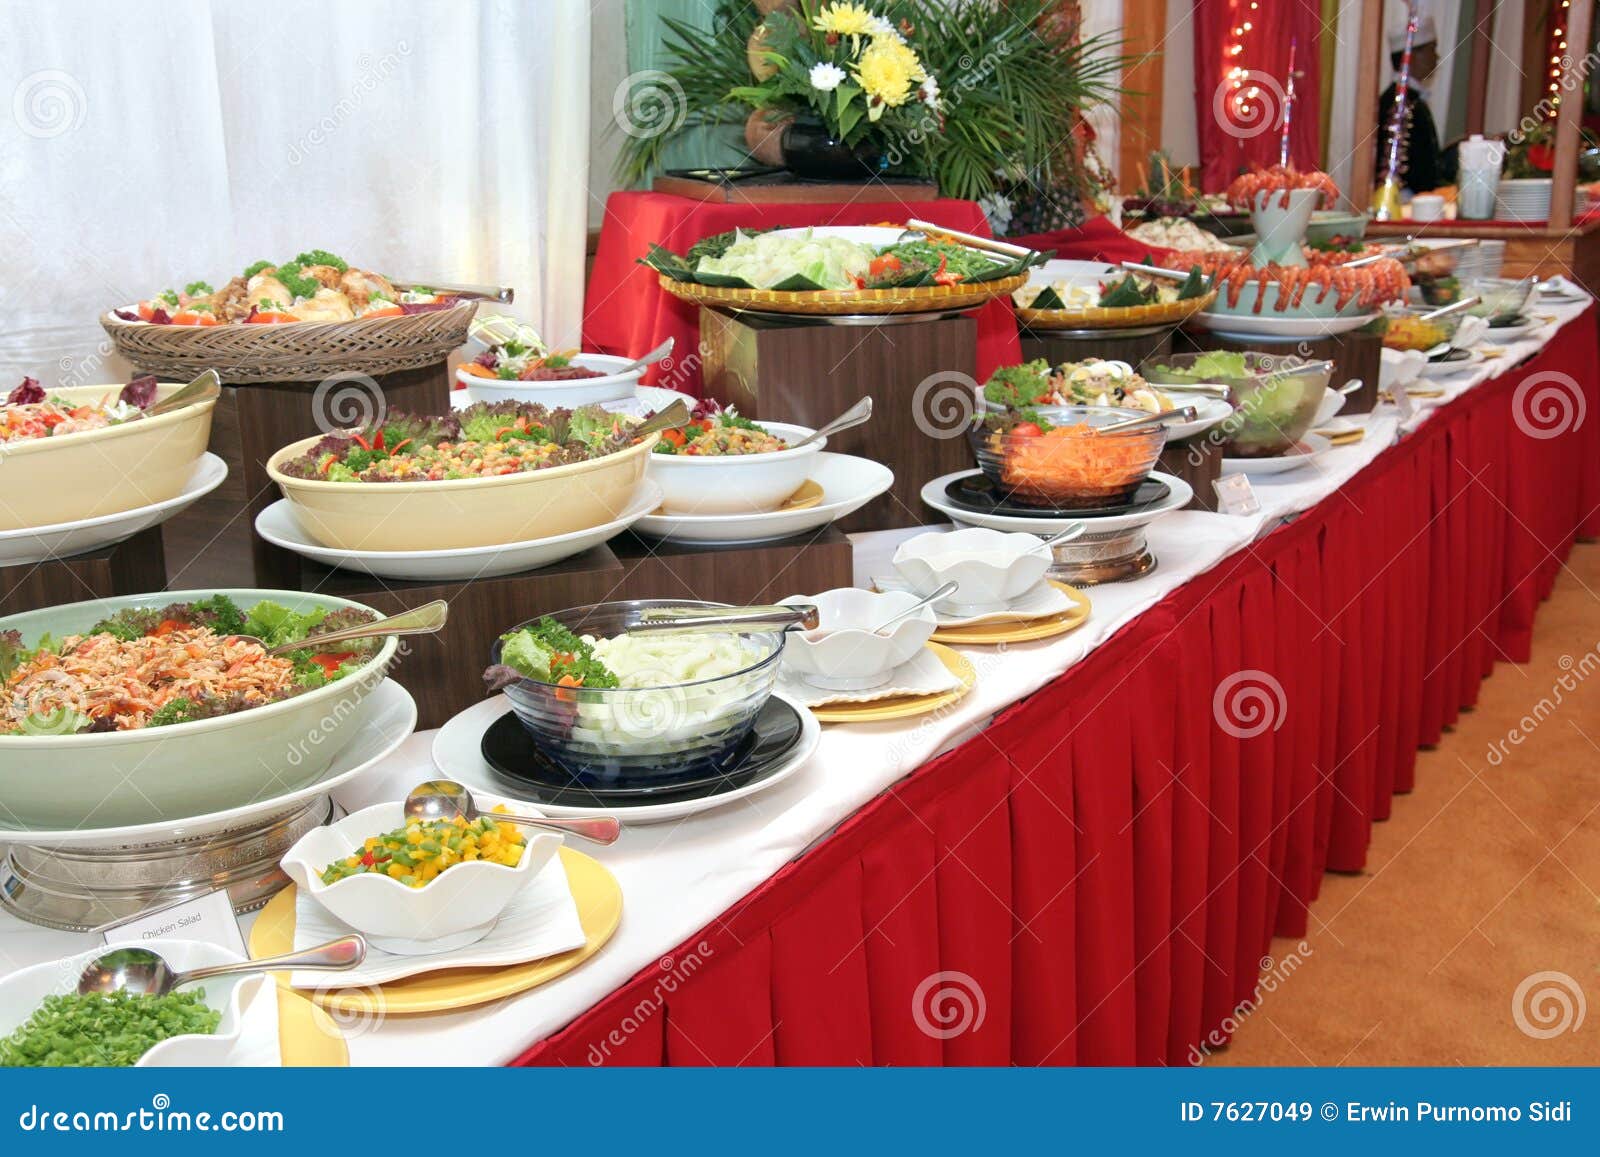 Food in buffet dinner stock image. Image of plate, restaurant - 7627049